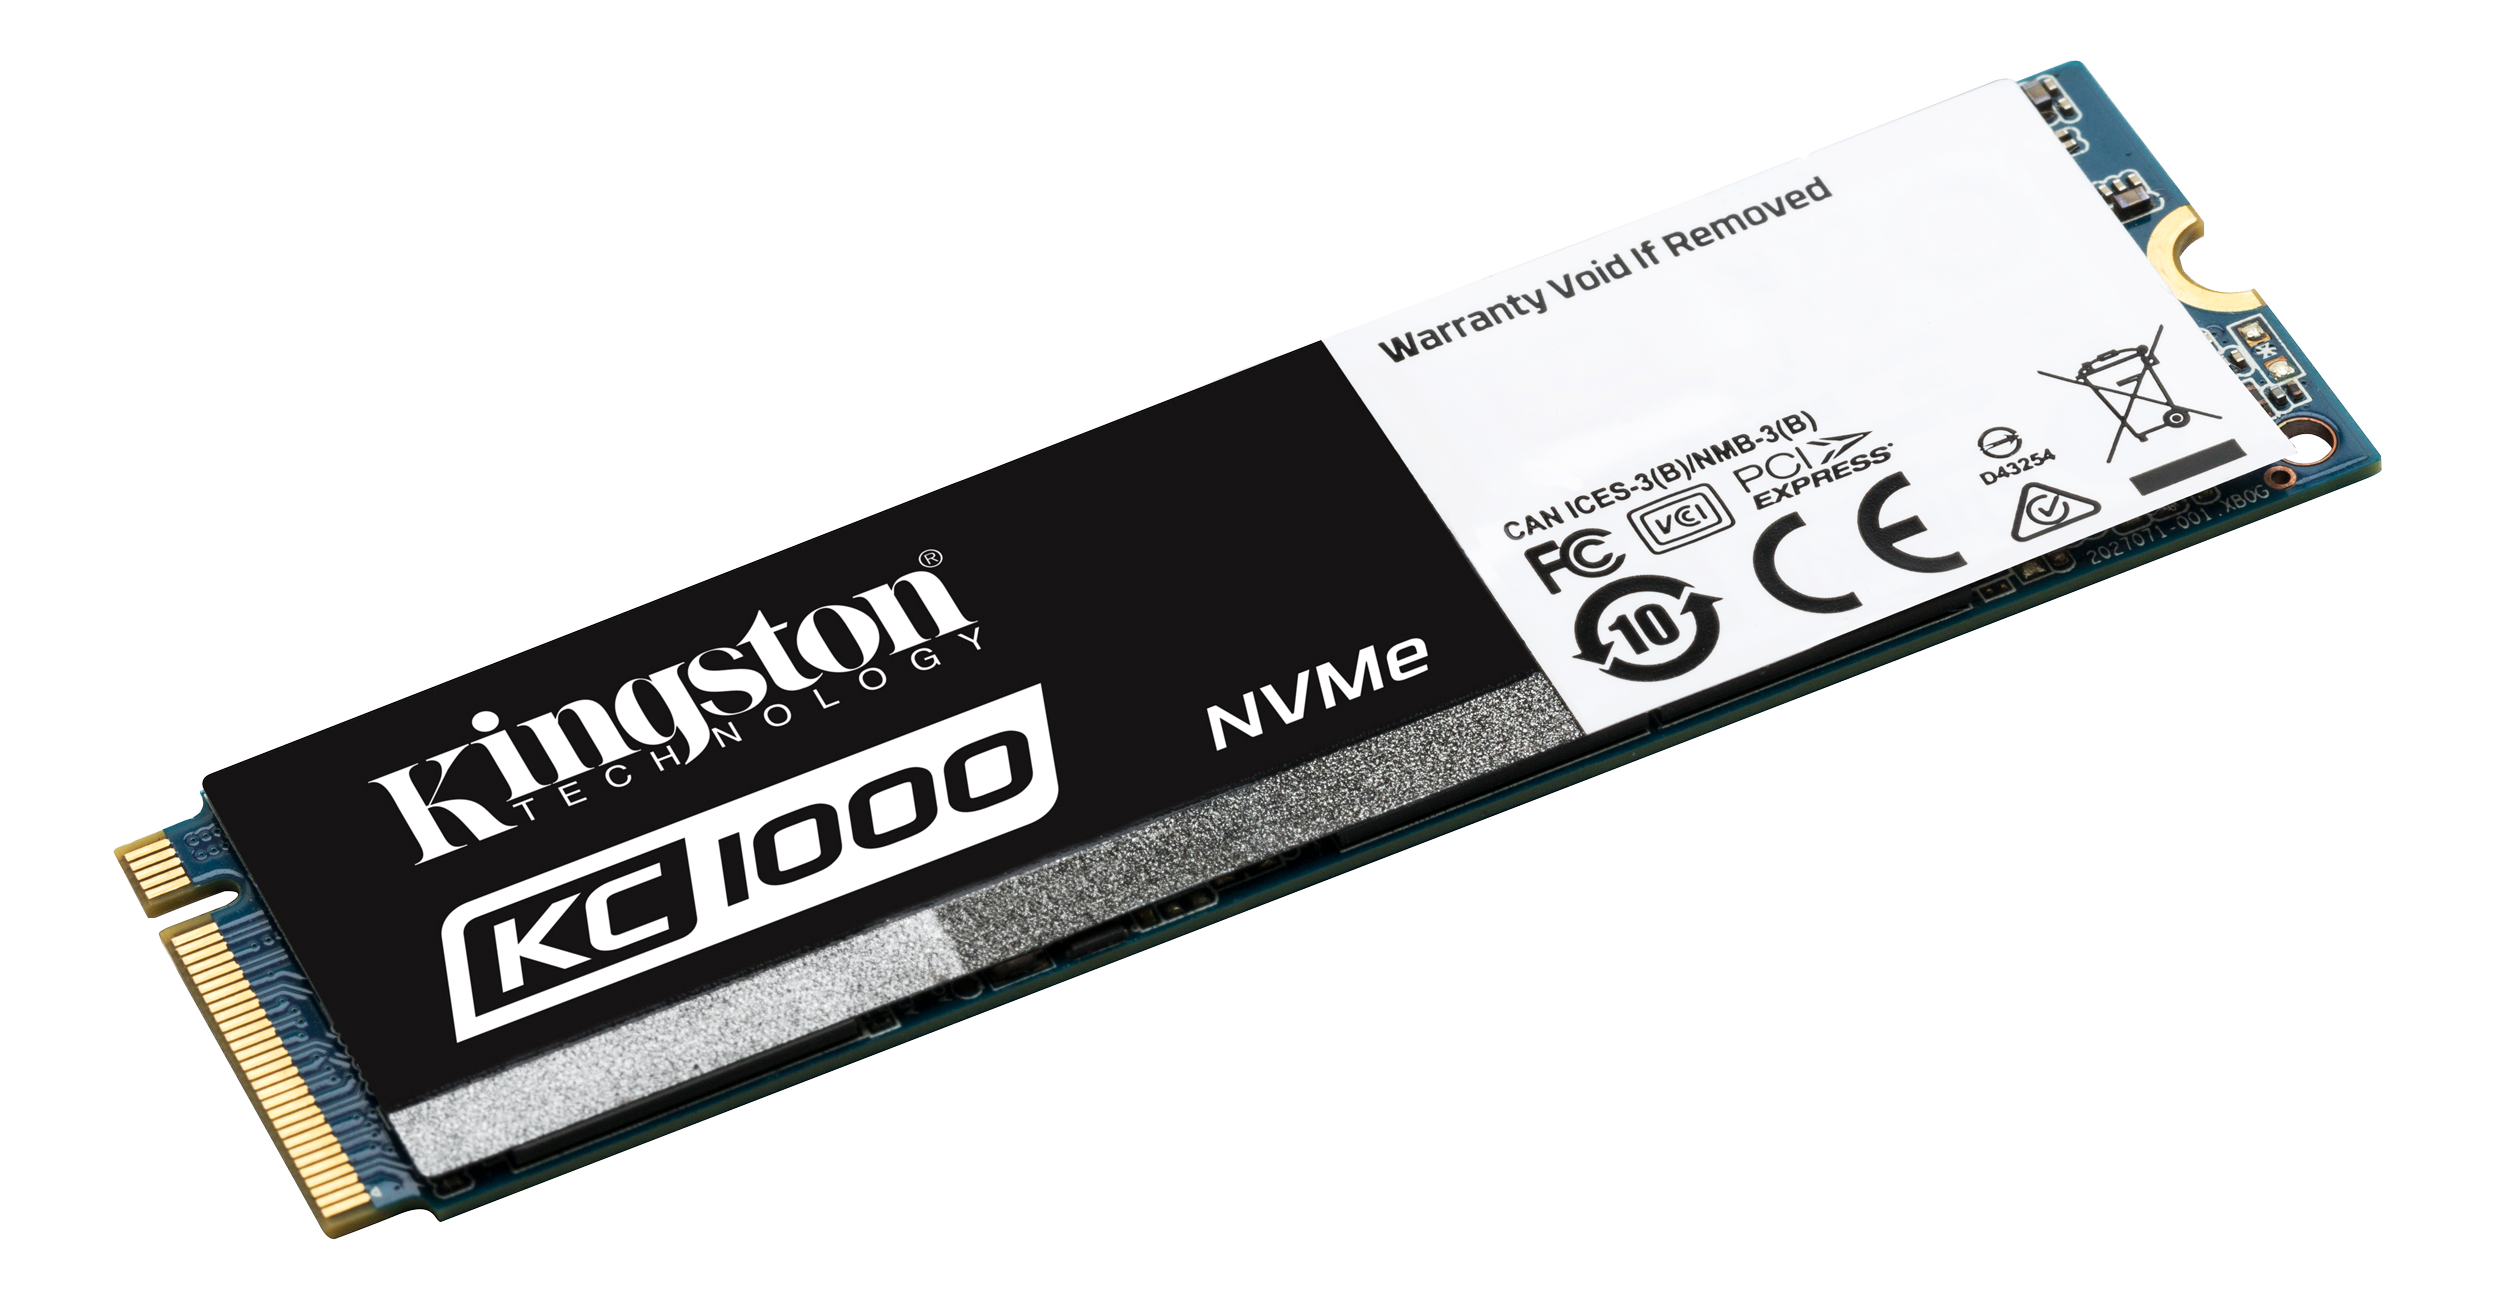 M.2 NVME (M) Data Recovery, M.2 SATA (B+M) Data Recovery